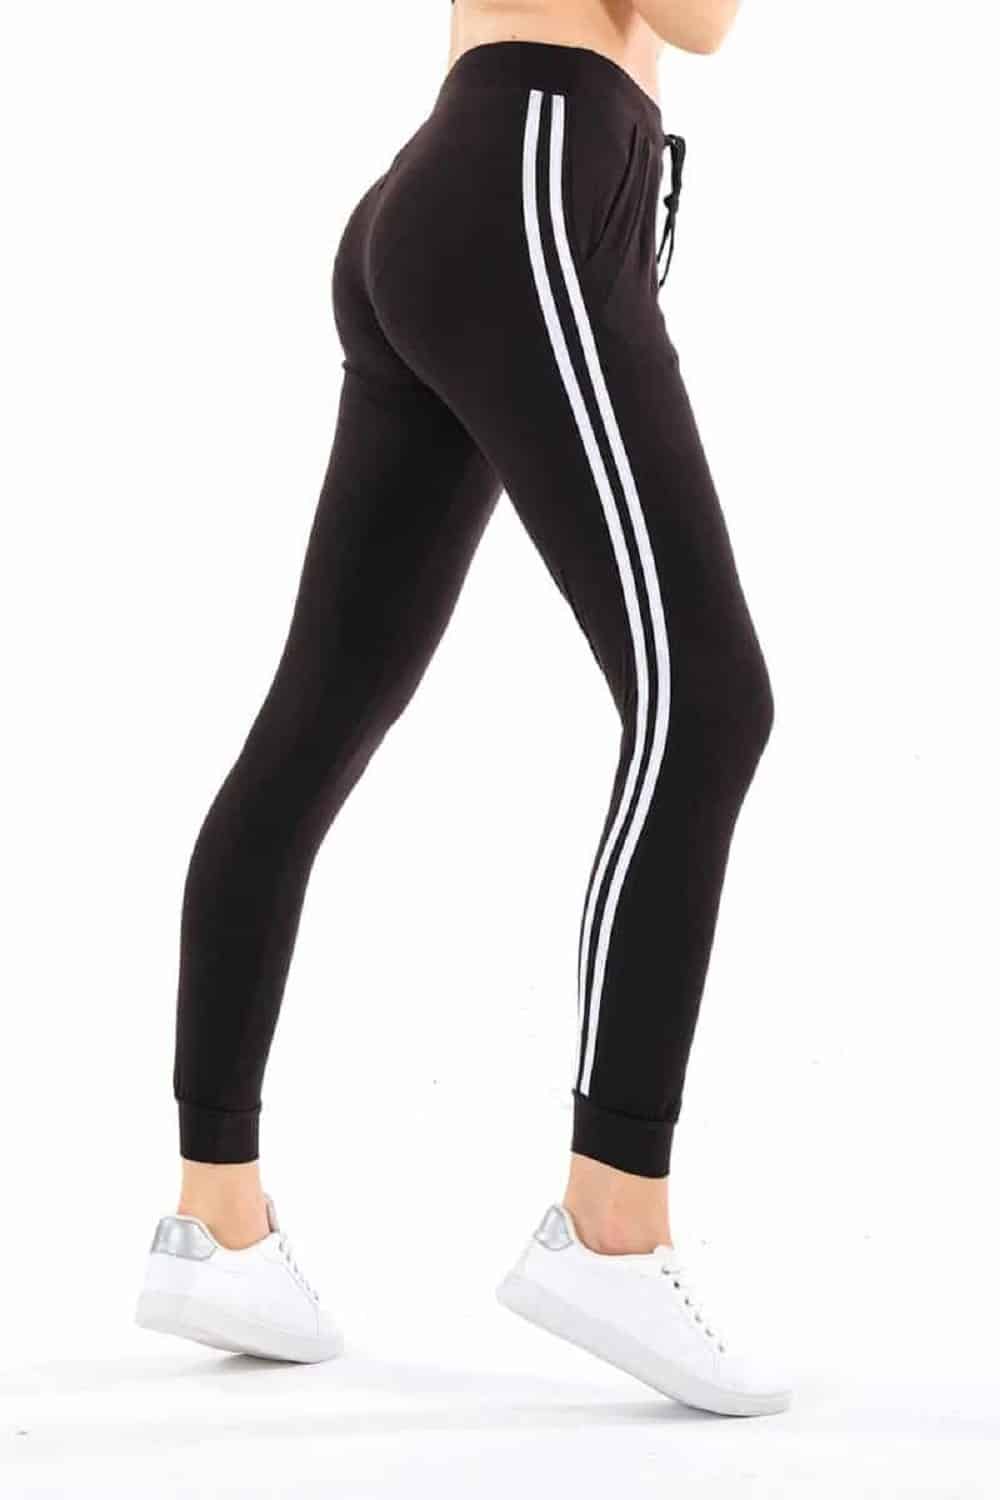 Yummy Material Jogger Pants Black with White Stripes - Its All